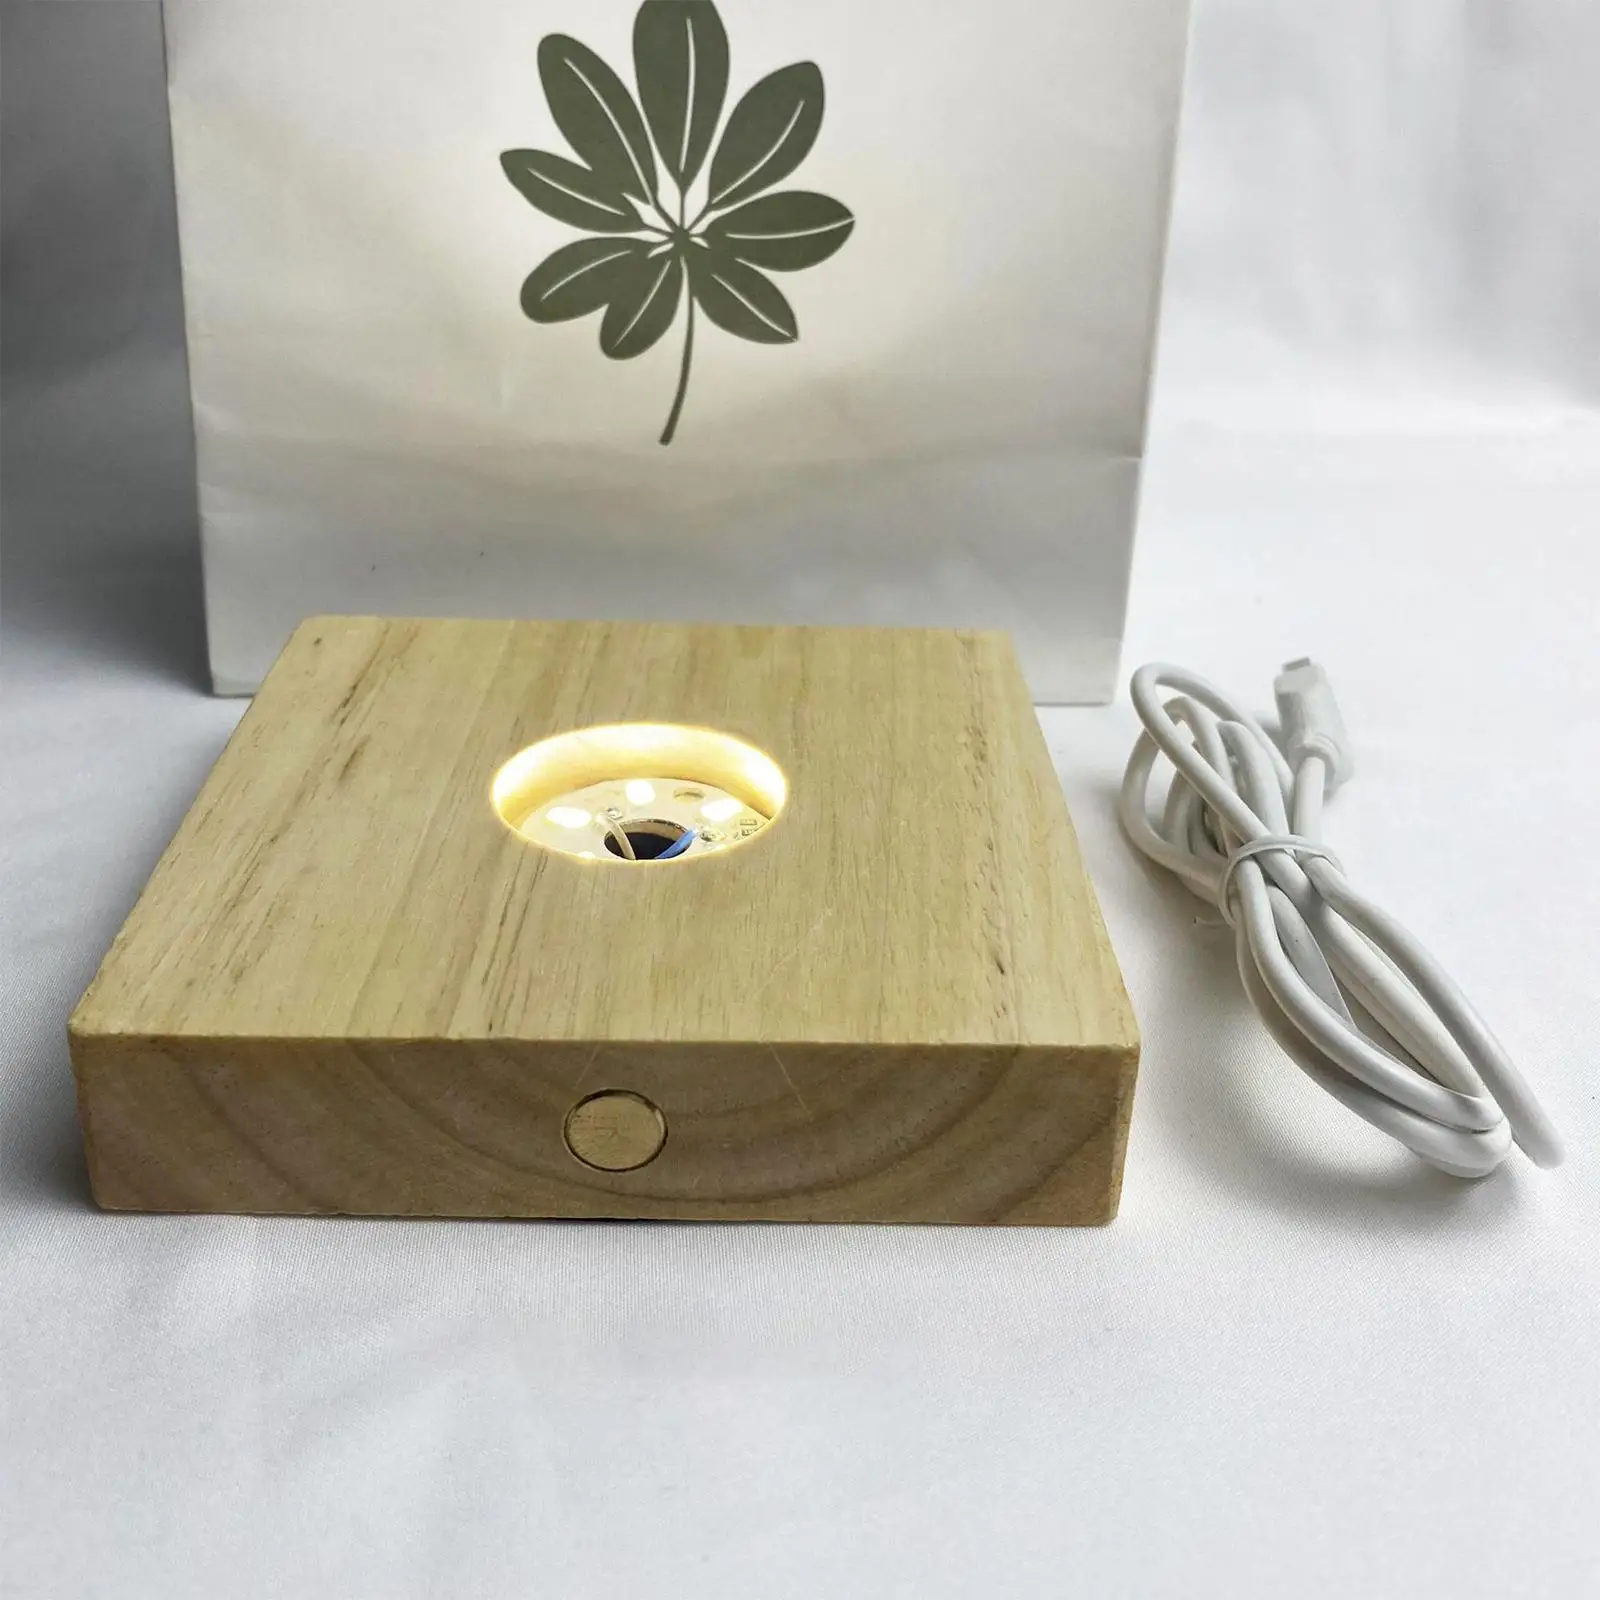 Wooden Display Lamp USB Illumination Holder LED Light Stand Base Nightlight Pedestals for Crystals Acrylic Jewelry Decoration